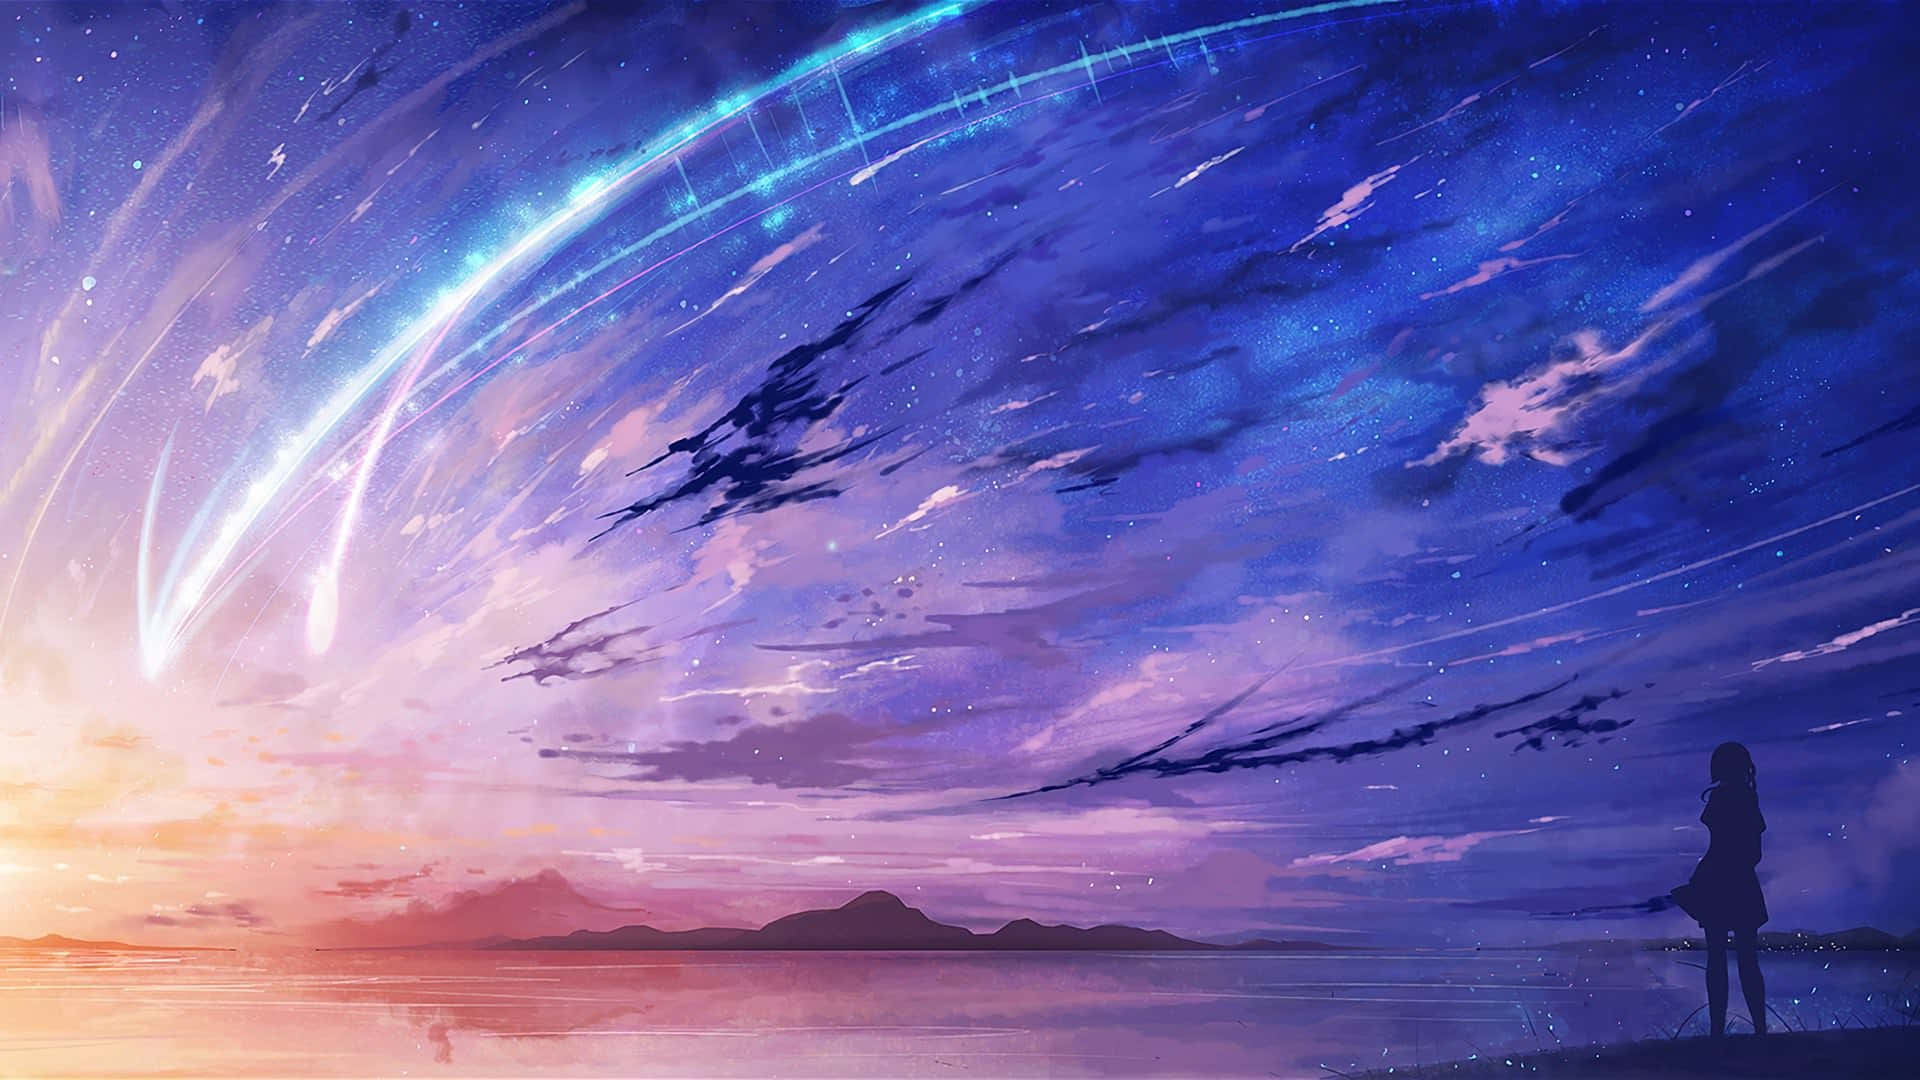 Experience the beauty of a stunning Anime-inspired sky. Wallpaper